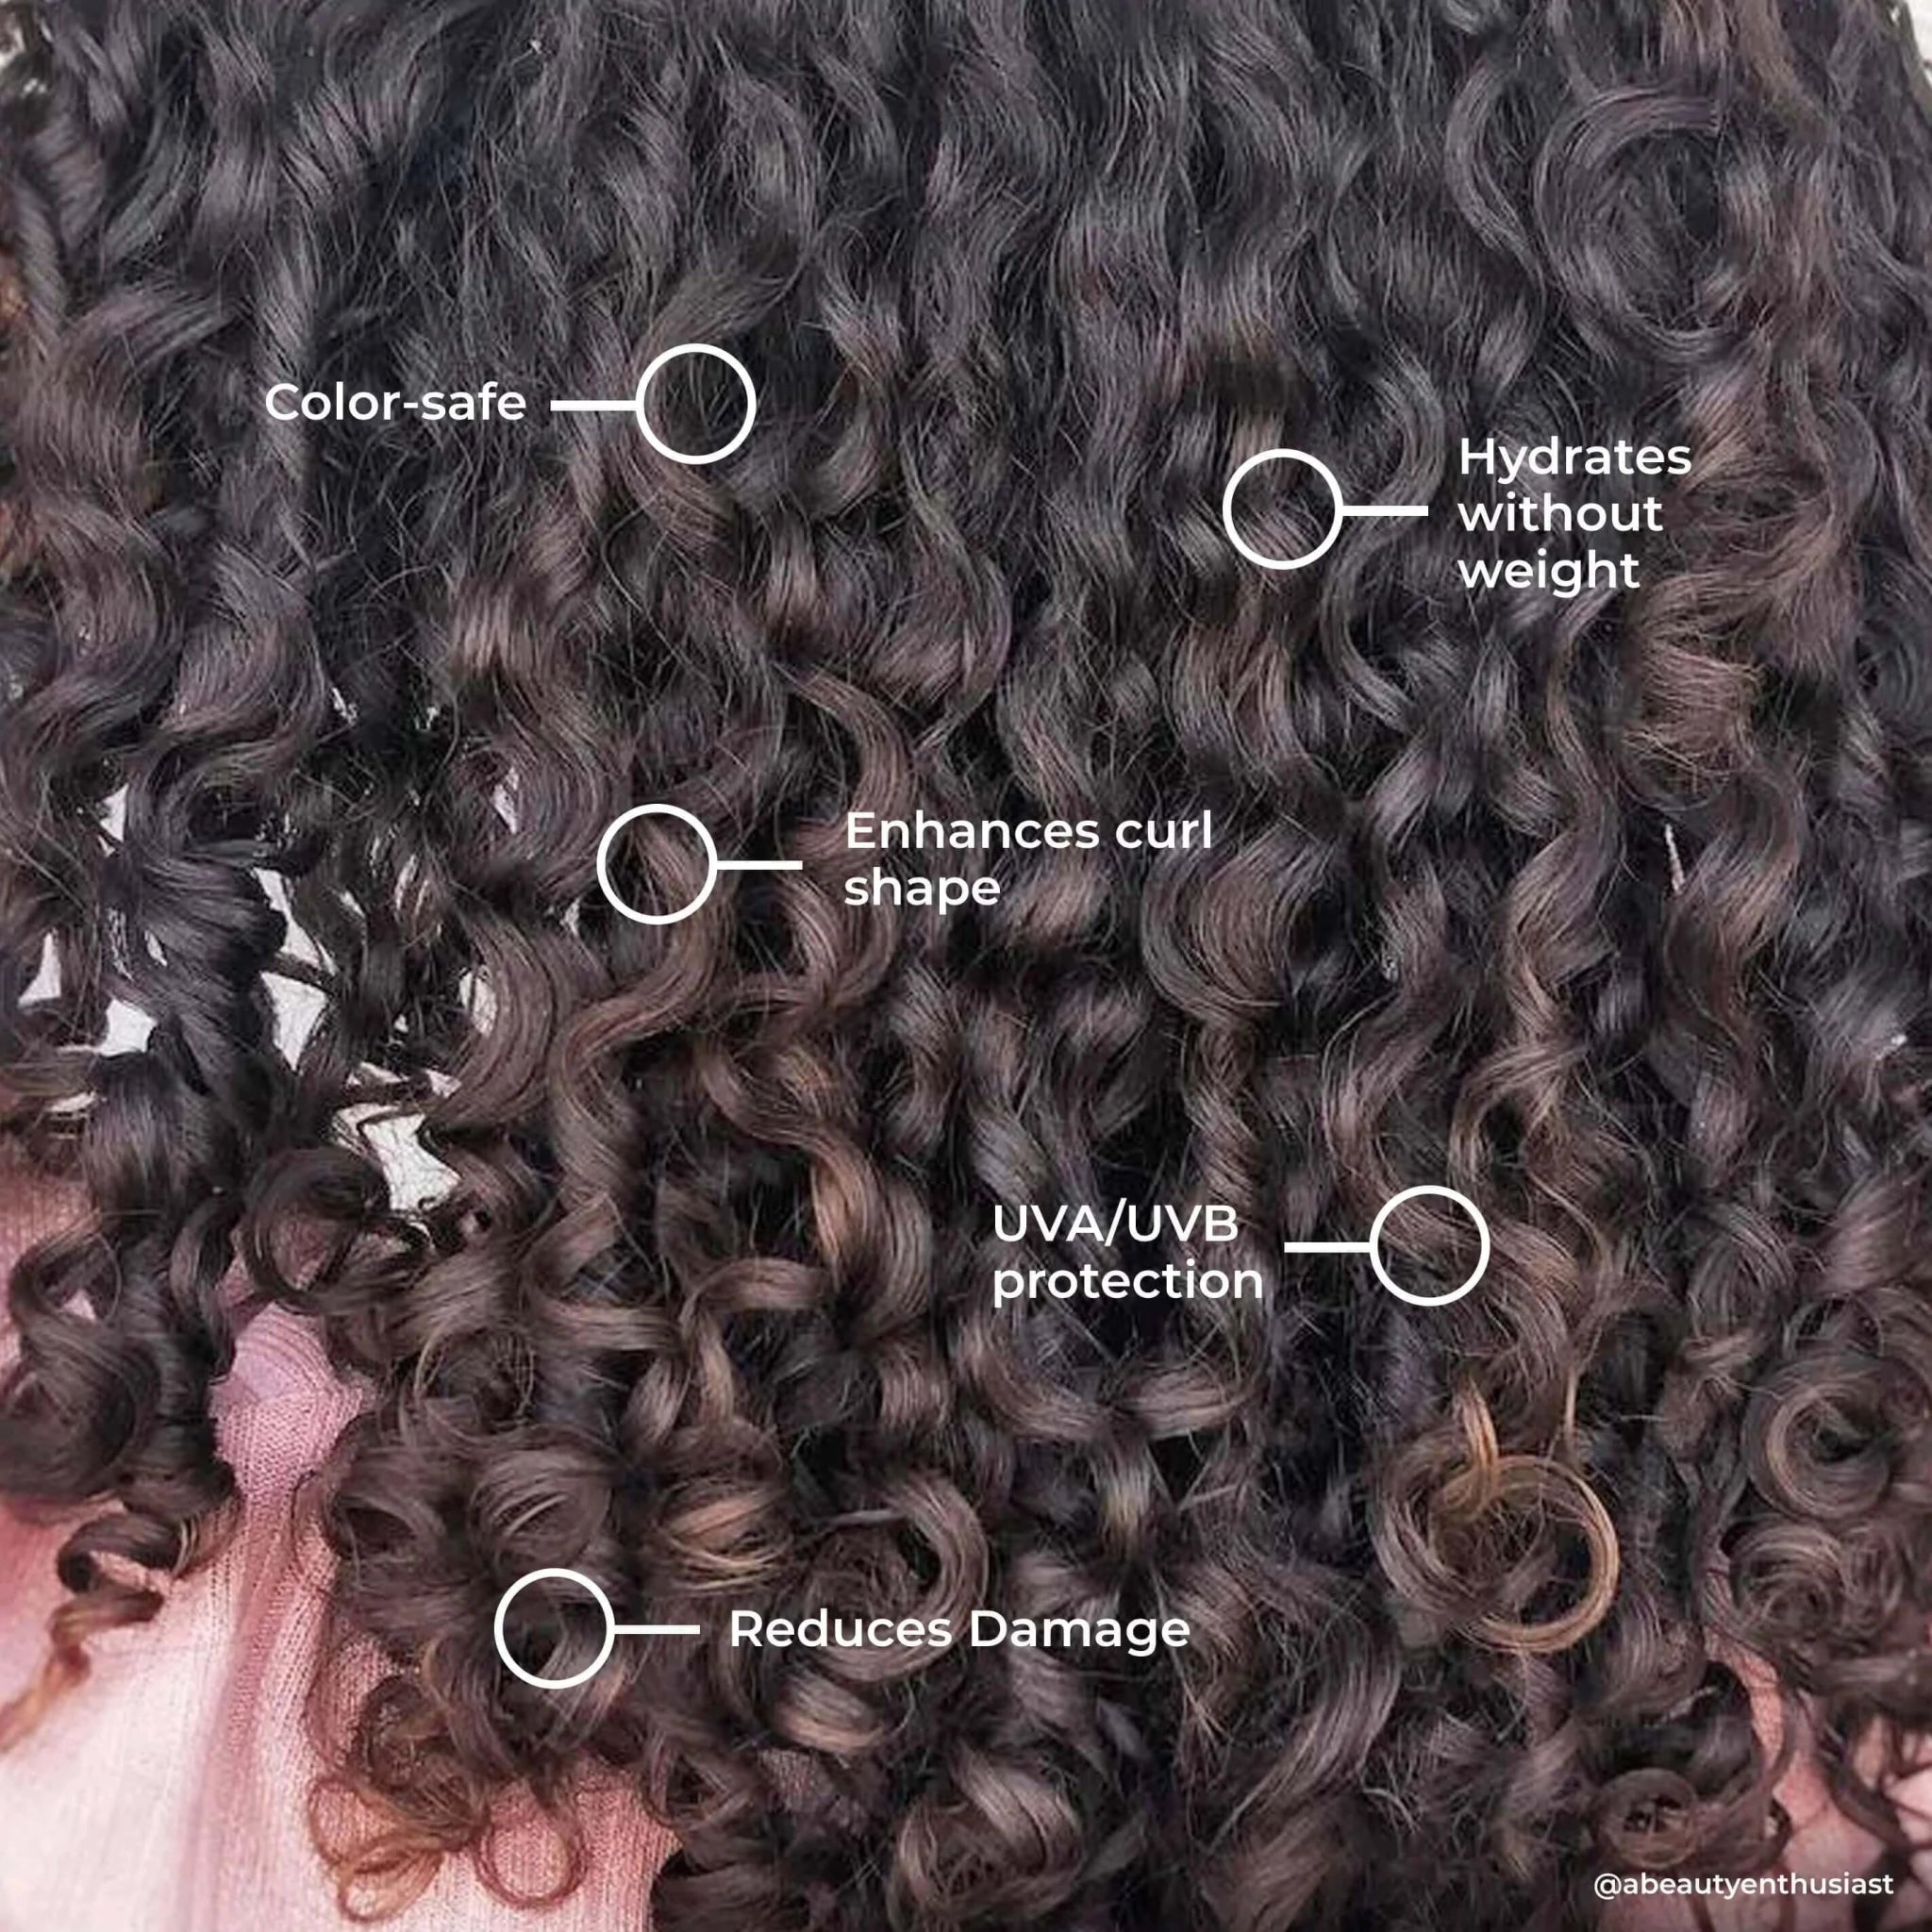 Close-up of curly hair with annotations highlighting the benefits of Leaf & Flower Instant Curl Repair Shampoo and Conditioner Duo by Leaf and Flower: color-safe, hydration without weight, enhances curl shape, uva/uvb protection, and reduces damage.